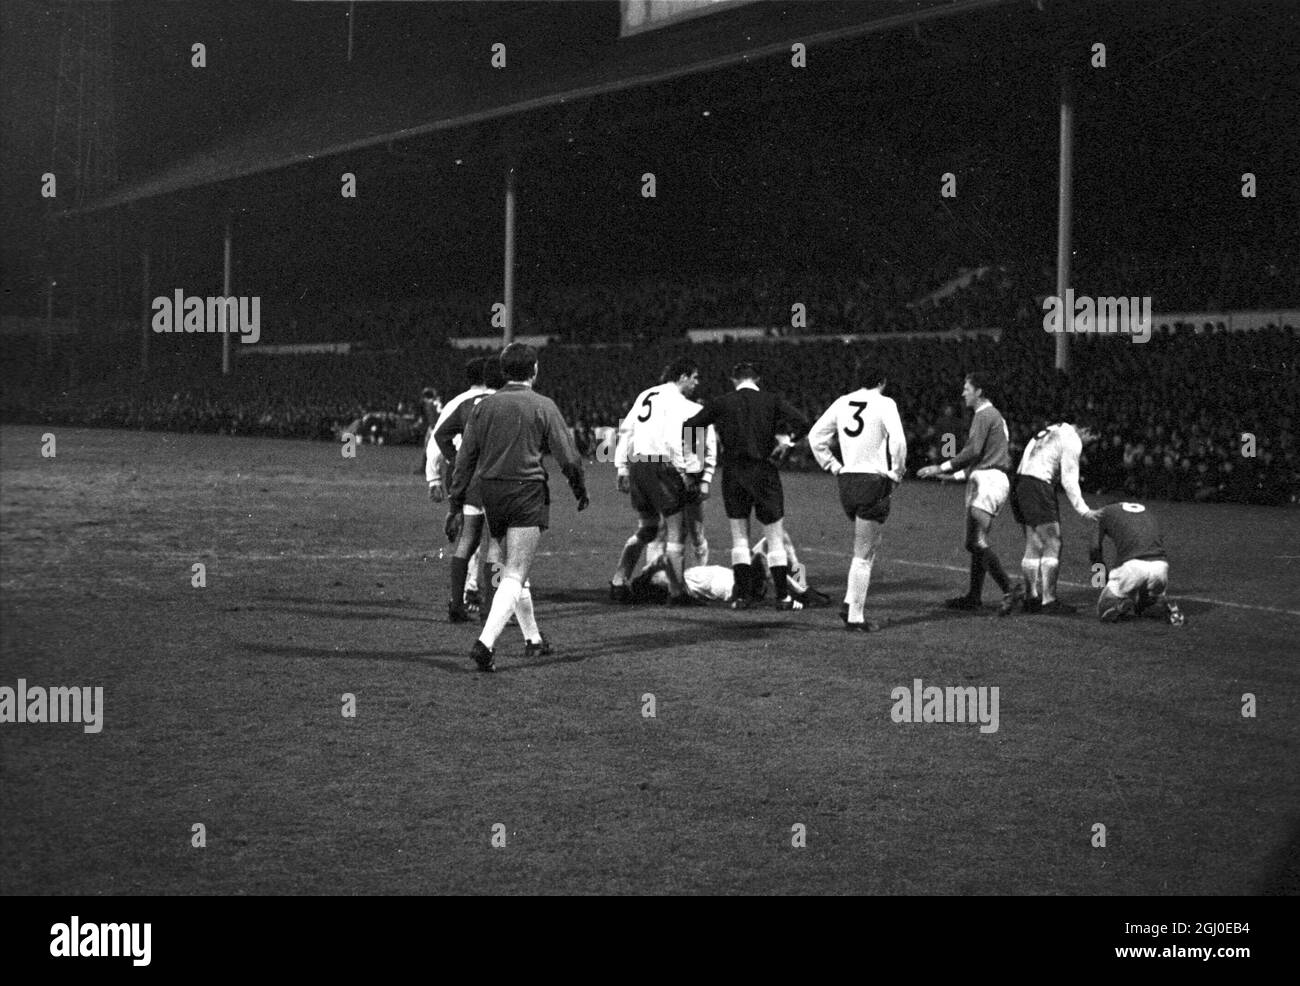 Tottenham Hotspur v Manchester United Two players lay on the White Hart Lane pitch after a flare up in the FA Cup third round replay. Tottenham Hotspur skipper and left back Dave Mackay (No.6) points to Manchester United inside-right Brian Kidd, holding his head in pain after his punch up with Tottenham right back Kinnear (on ground left) which ended in the two men being sent off. Players surrounding the Spurs player are (from left) Alan Gilzean, George Best, Alan Mullery, Mike England, Pat Jennings, left winger Beal, and Cyril Knowles. Spurs won the game 1-0 after extra time. 31st January 196 Stock Photo